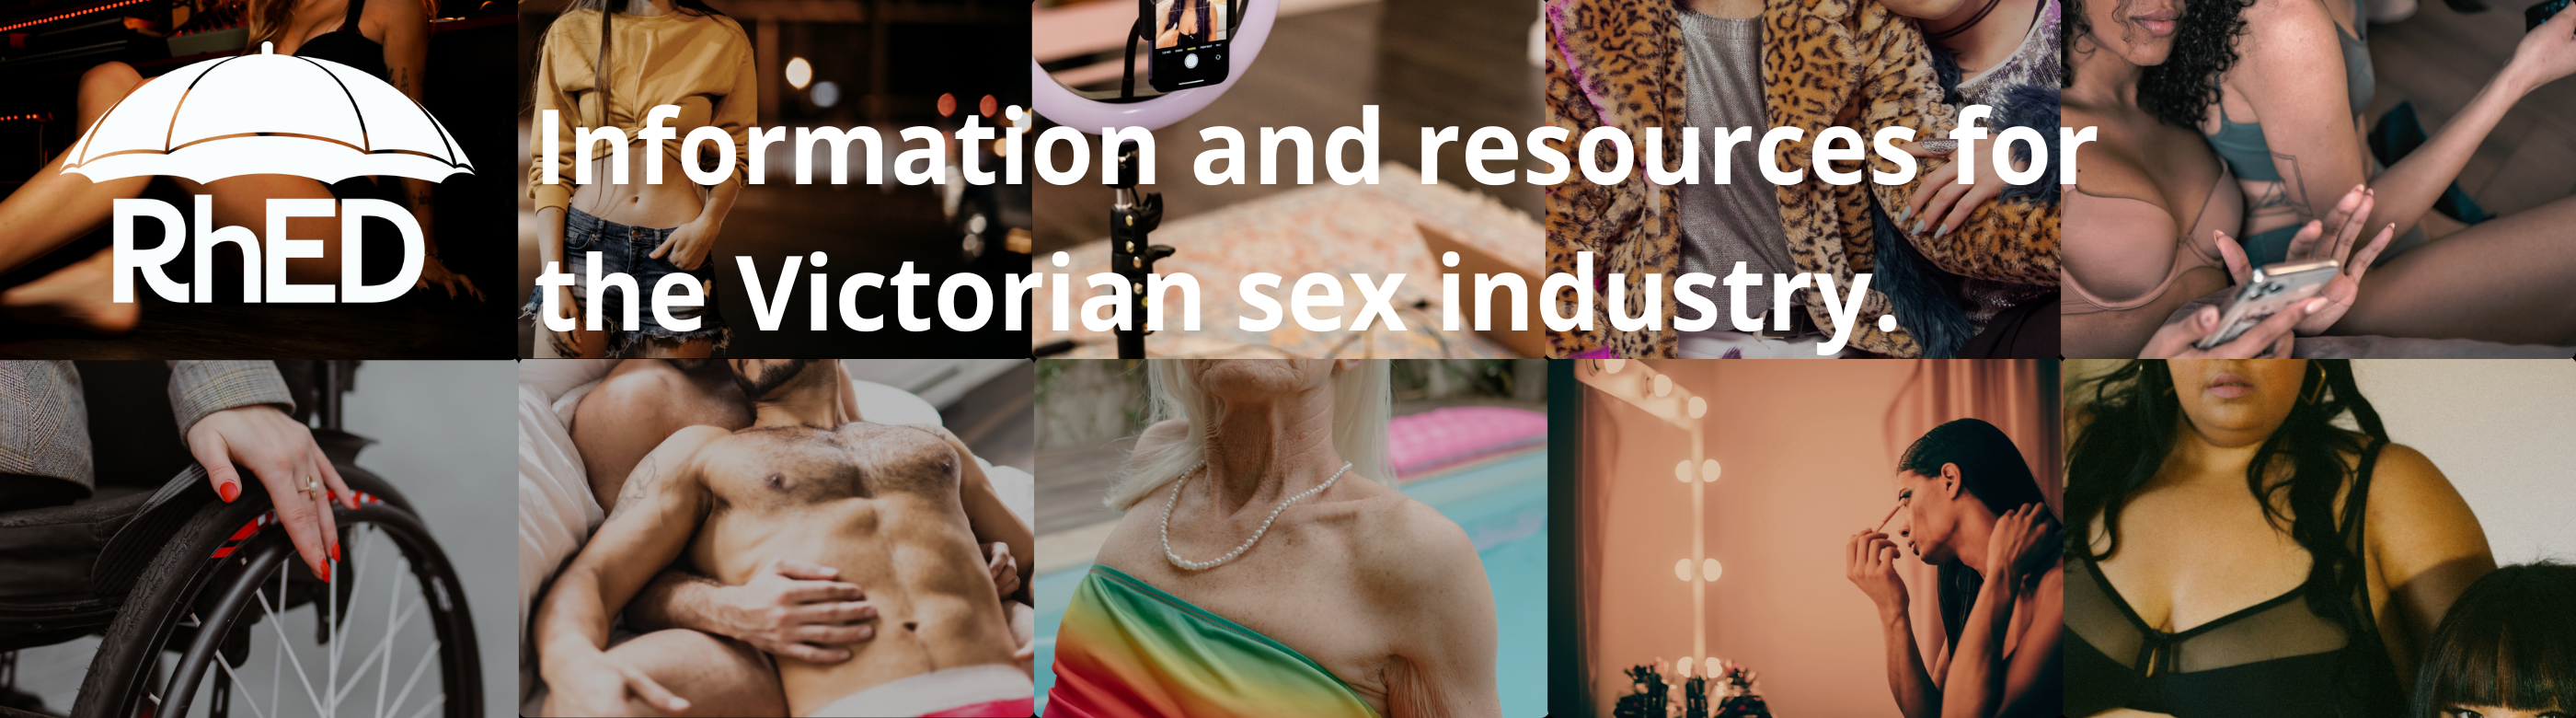 RhED information and resources for the Victorian sex industry homepage banner